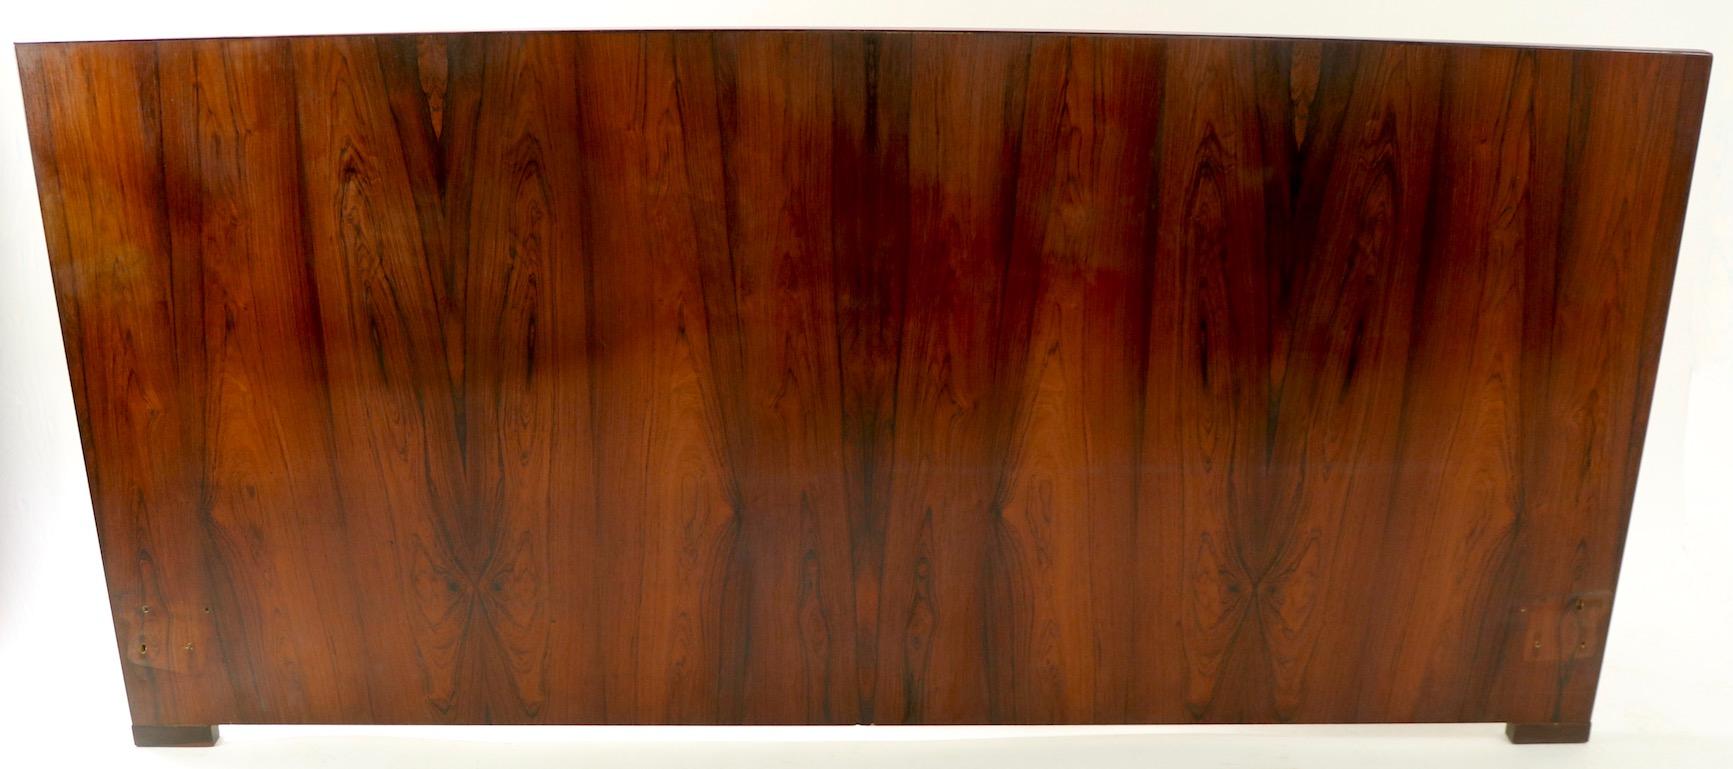 Stunning king size rosewood headboard by Dyrlund. Hard to find the large size headboards, especially in rosewood. This example has a slight warp to the board, however once attached ton you bed frame it is inconsequential - please see images.